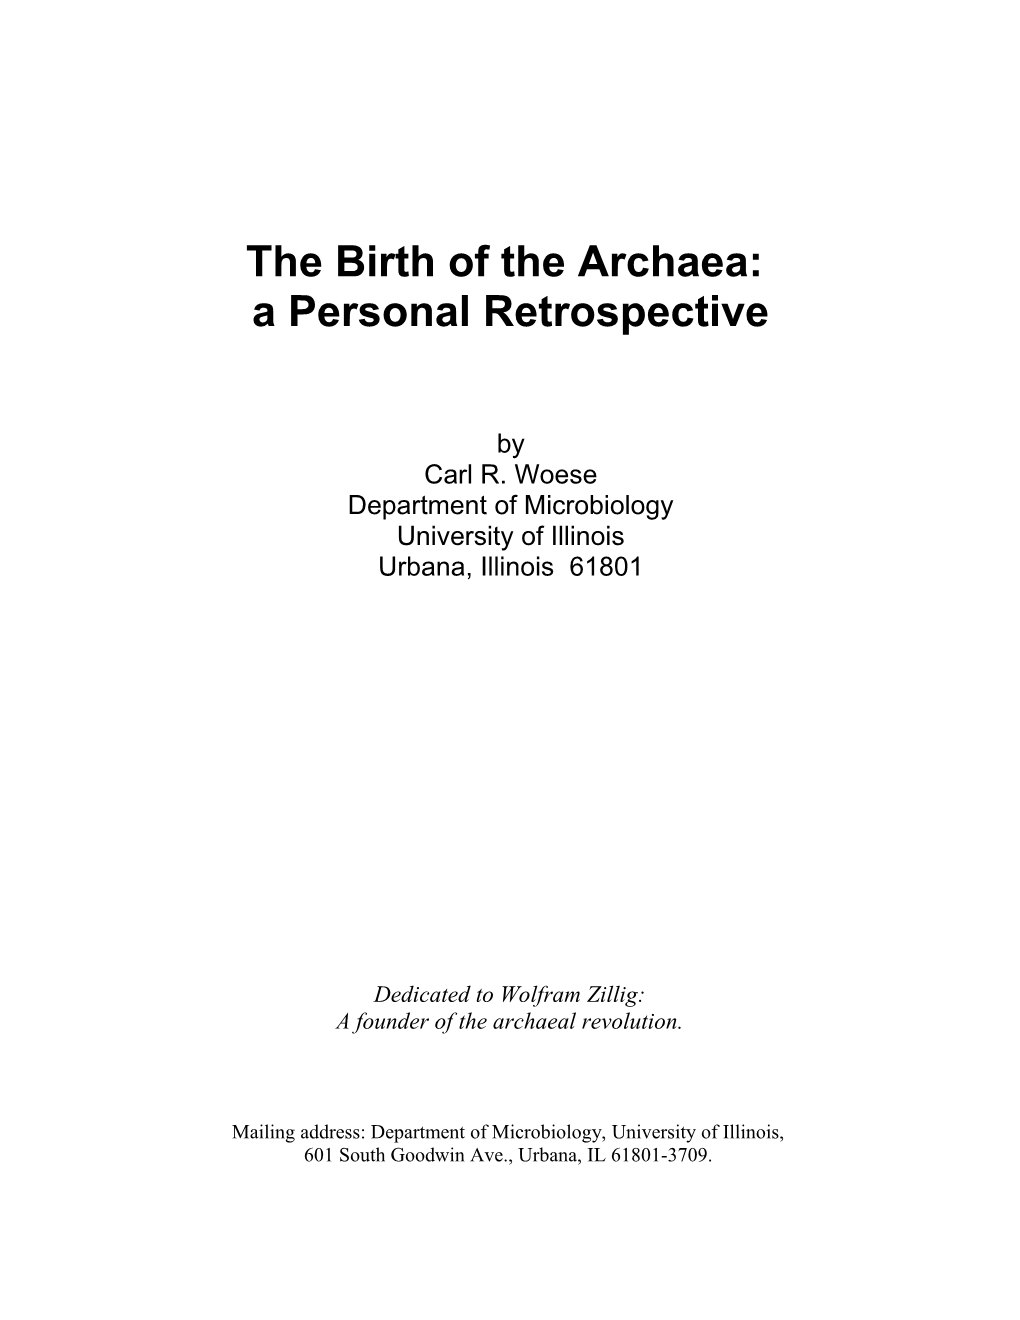 Fbthe Birth of the Archaea: a Personal Retrospectivefr